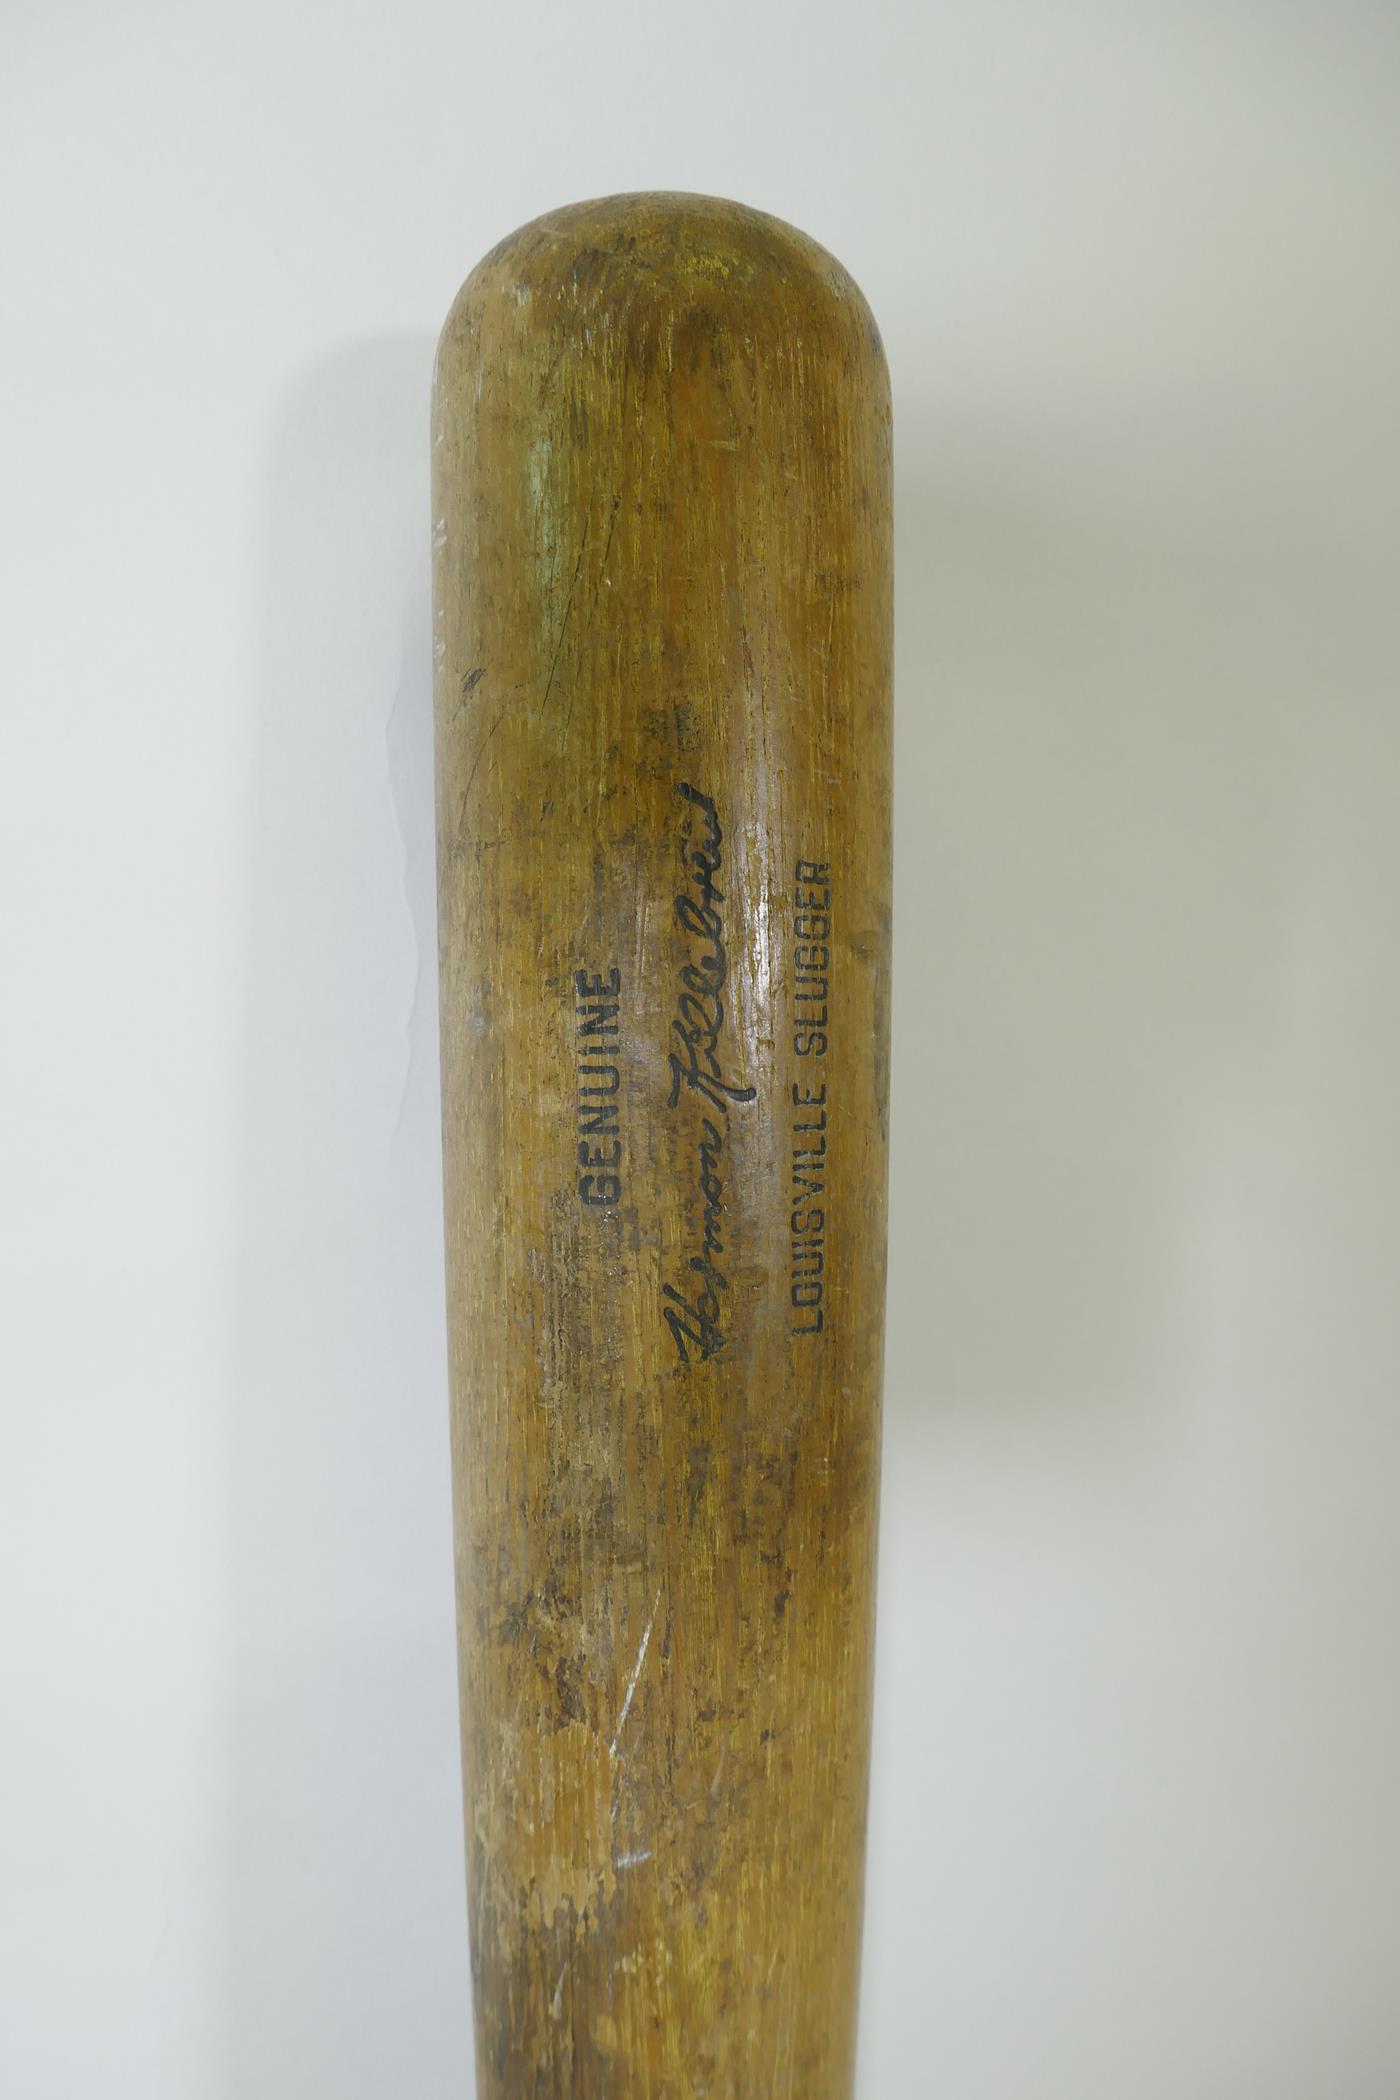 A genuine 'Louisville Slugger' baseball bat, No 125, Hillerich and Bradsby Co, Louisville, KY - Image 4 of 4